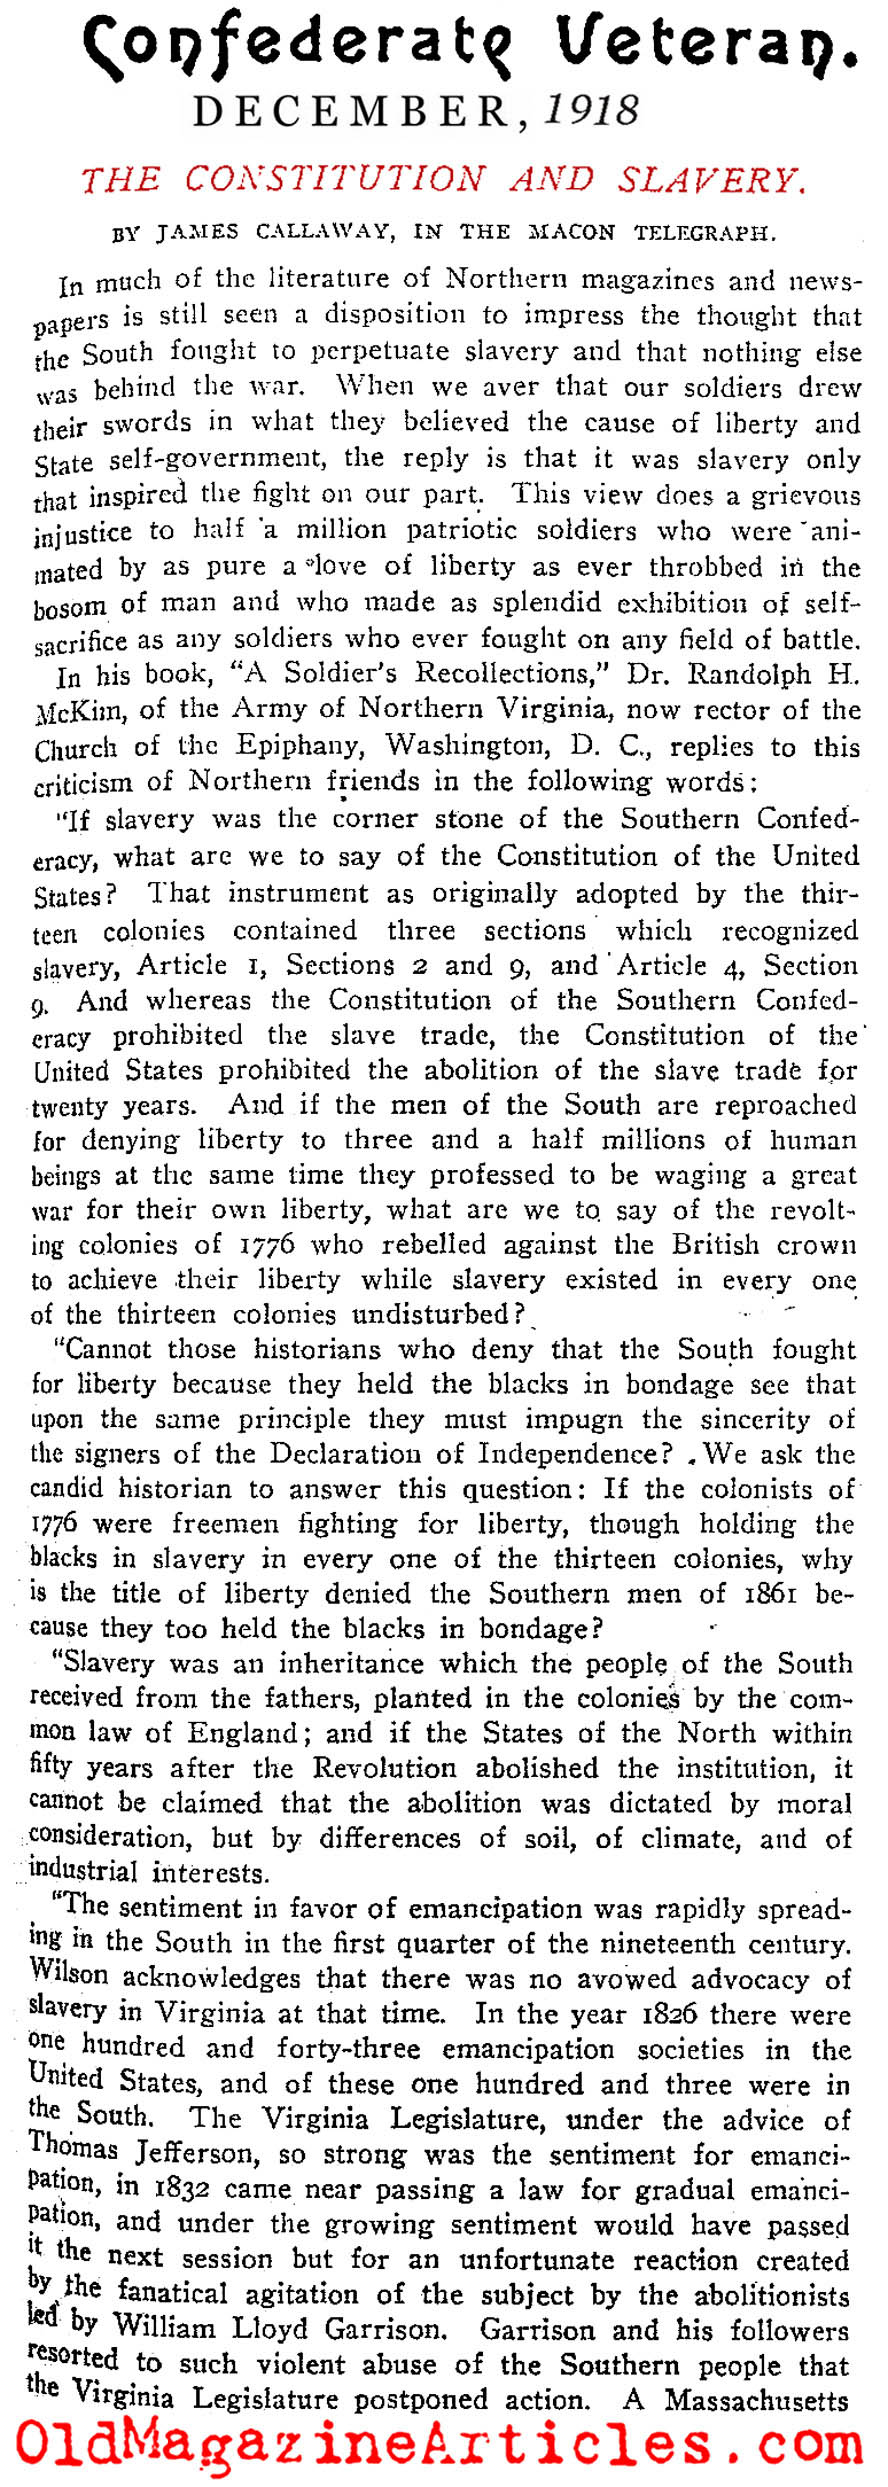 Why The Rebels Fought (Confederate Veteran Magazine, 1918)